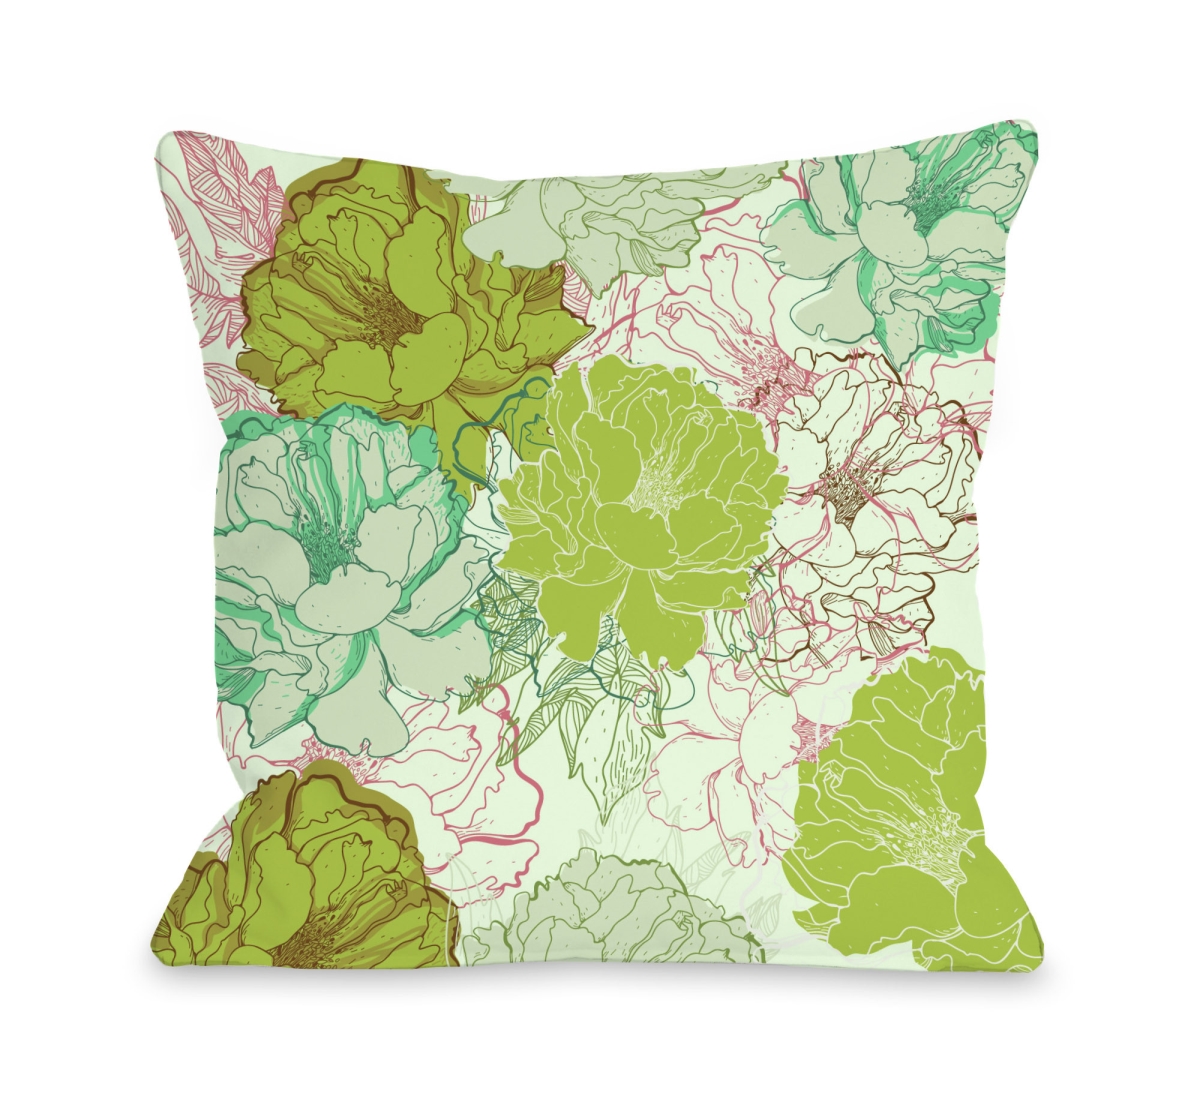 72452pl16o 16 X 16 In. Natalies Blooms Outdoor Pillow, Green & Multicolor